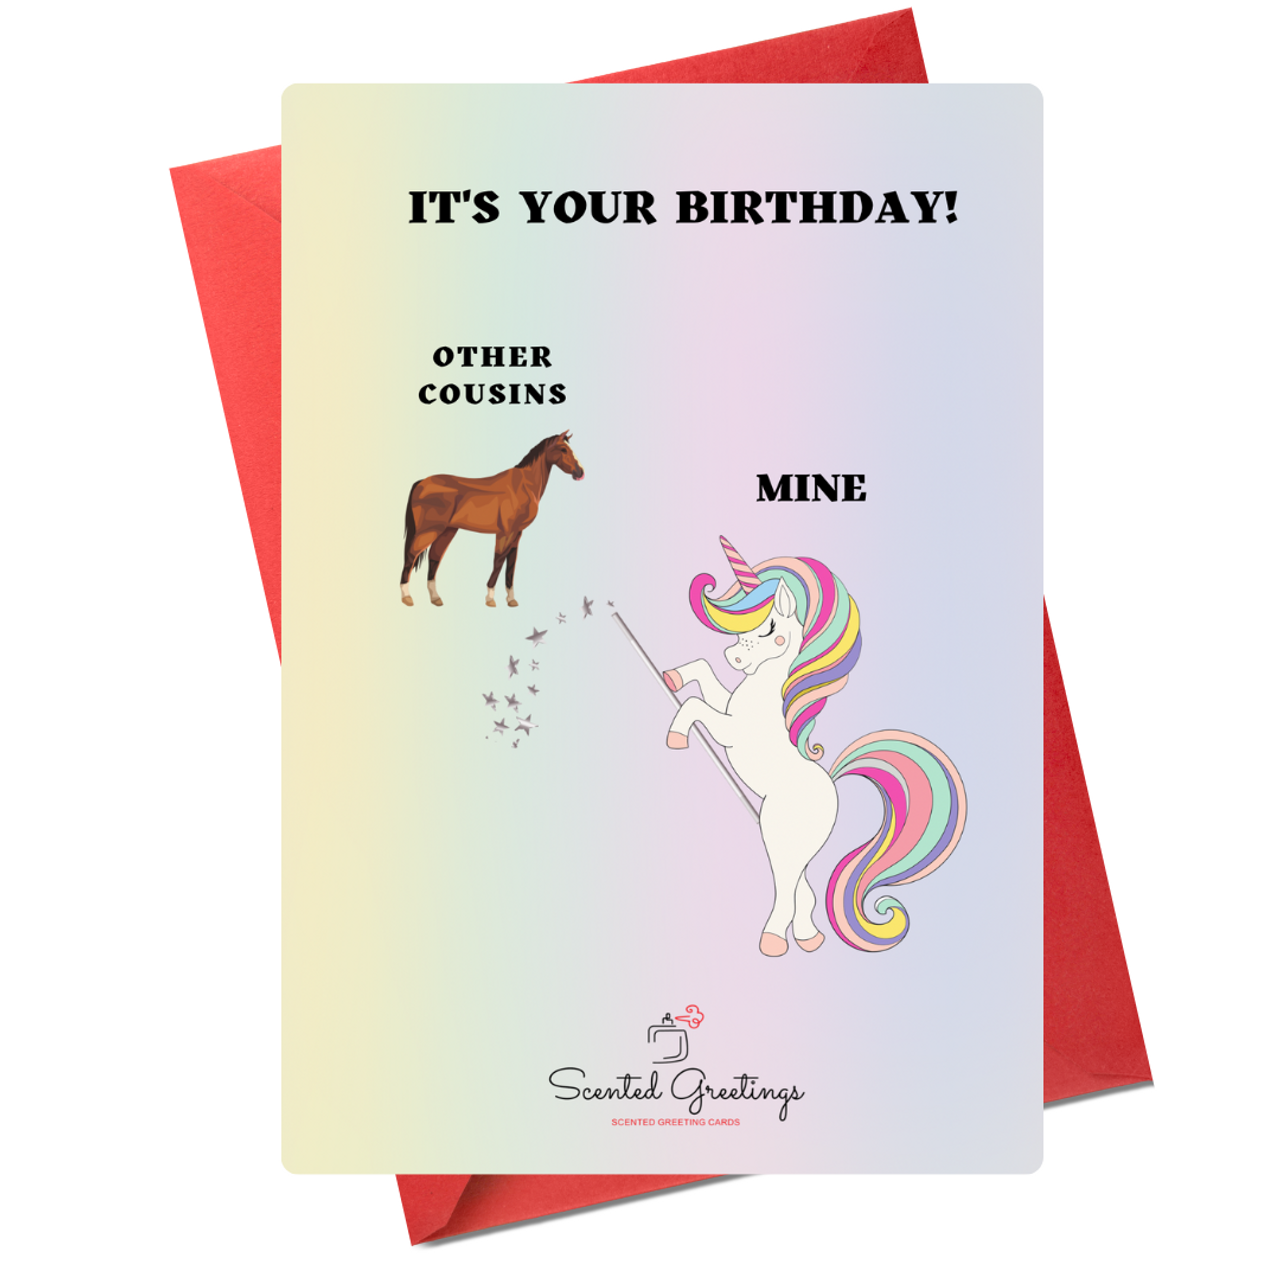 It's Your Birthday! Other Cousins and Mine| Scented Greeting Cards ...